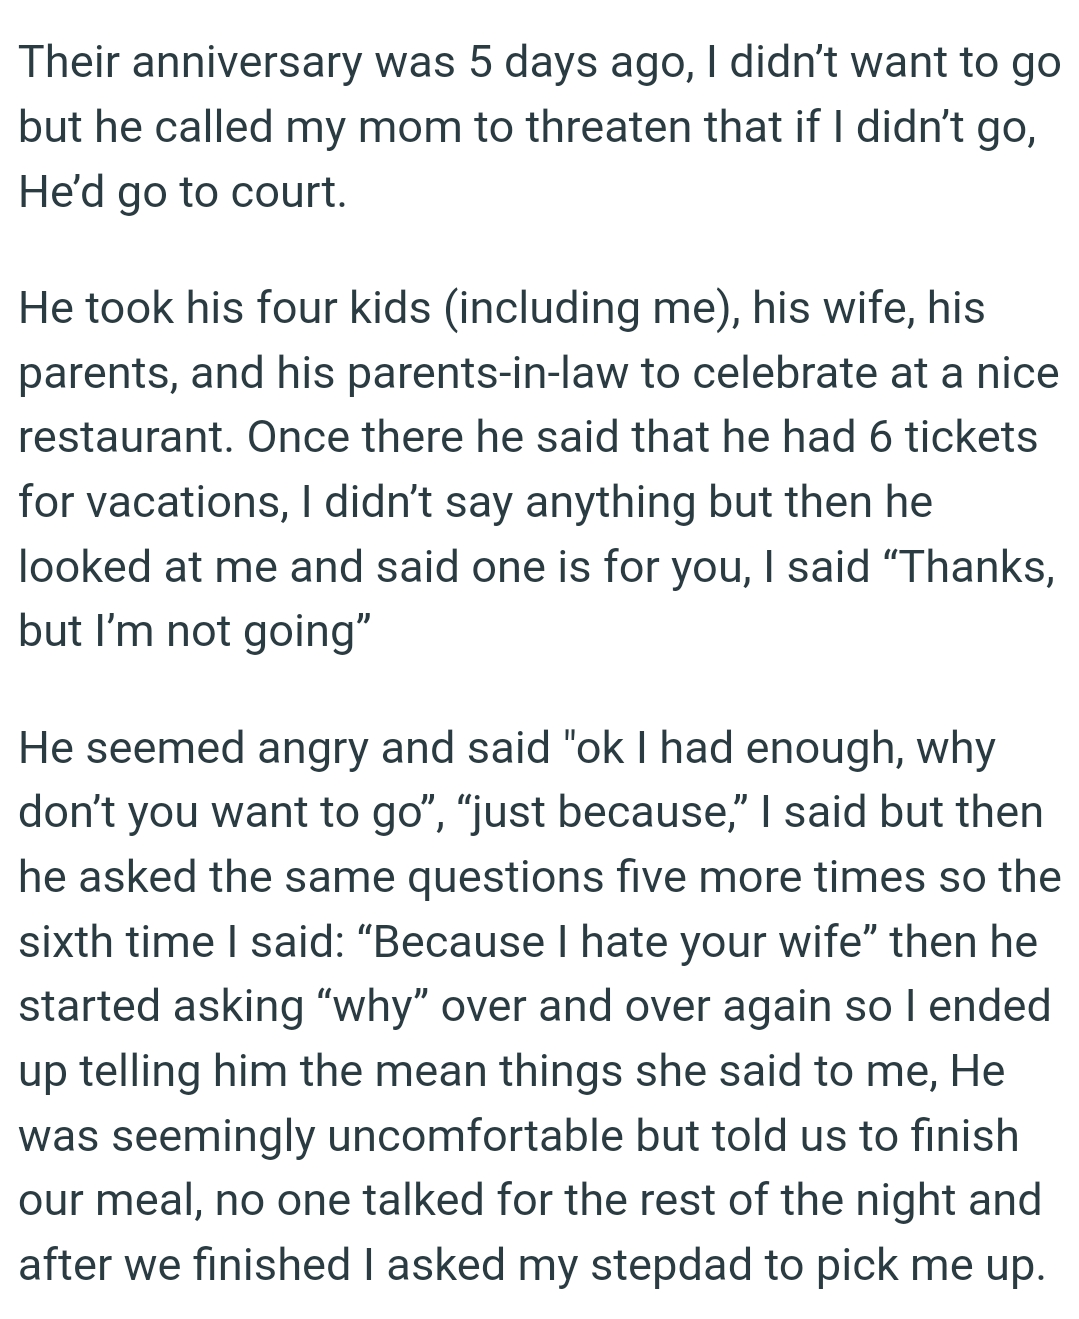 The OP ended up telling his dad the mean things his wife said to him